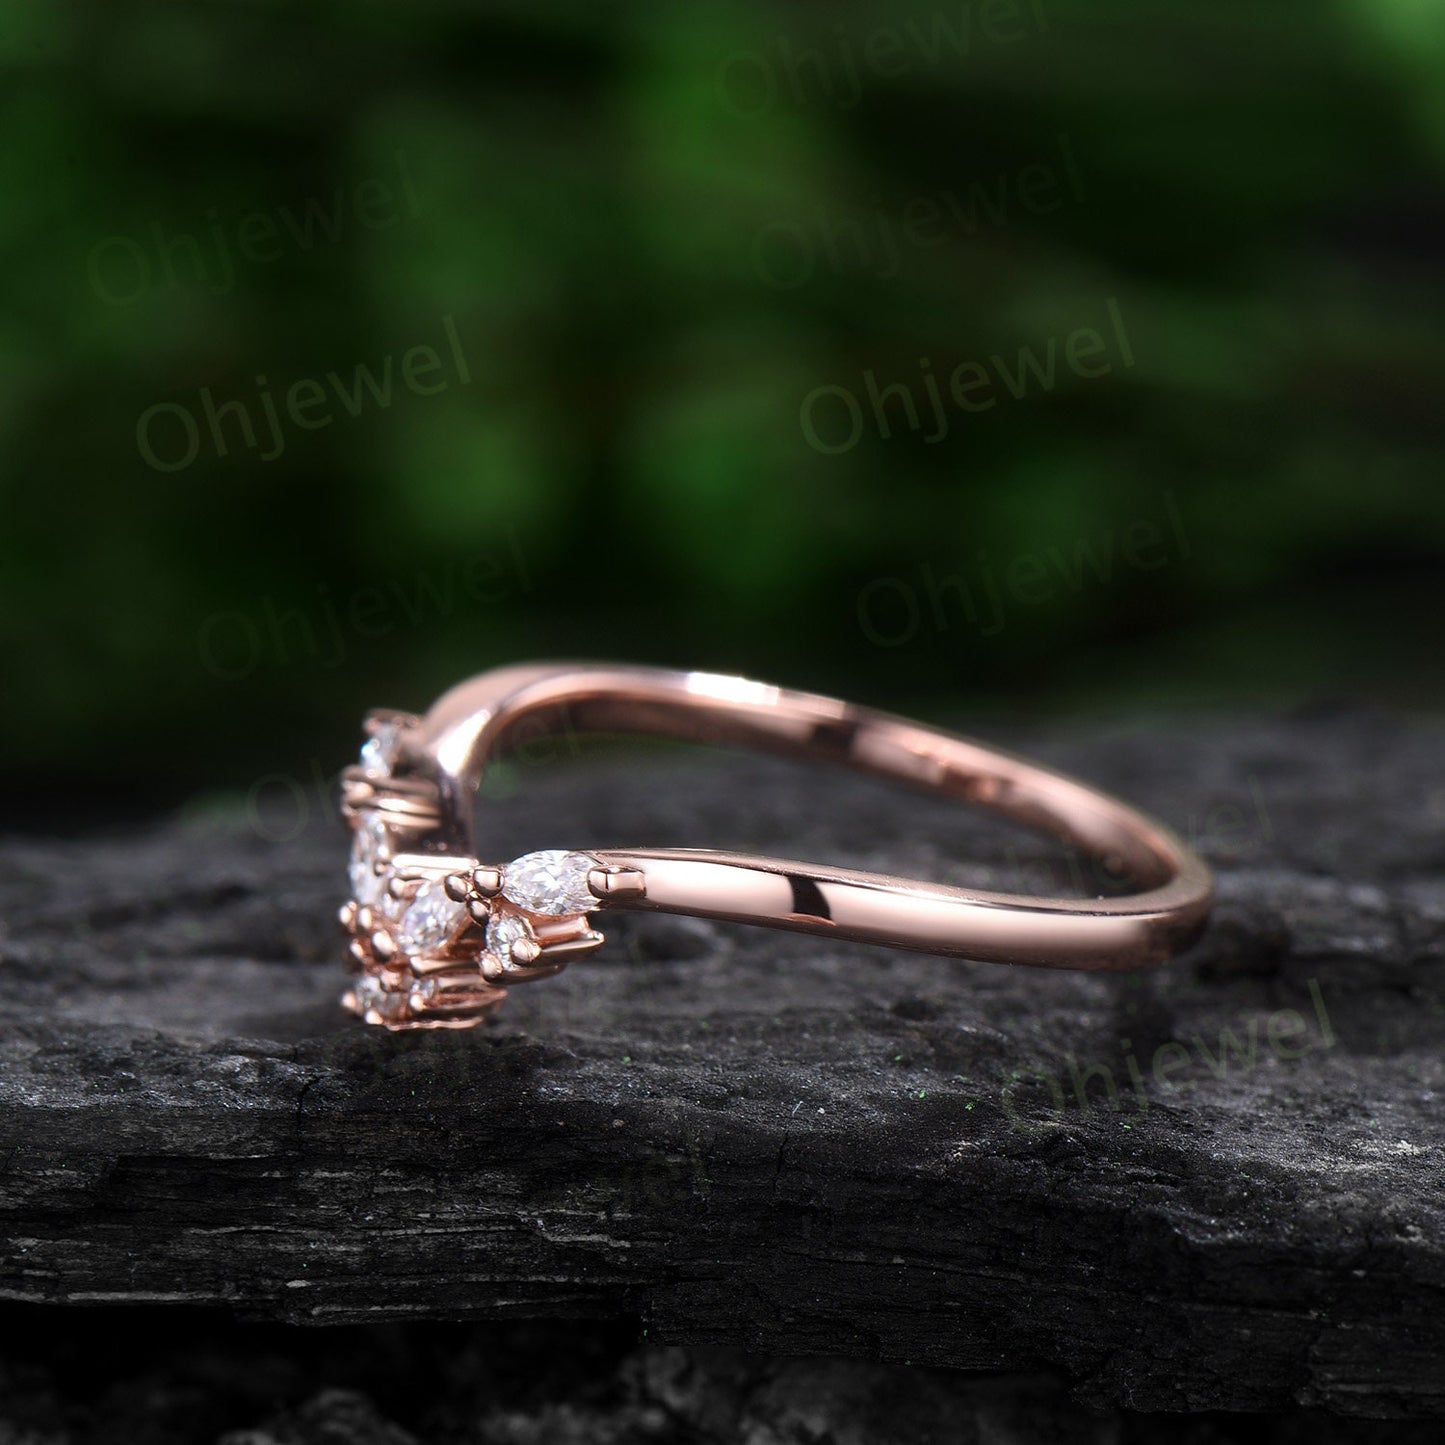 Cluster Alexandrite wedding band solid 14k rose gold moonstone moissanite wedding ring band marquise June birthstone ring Personalized gift